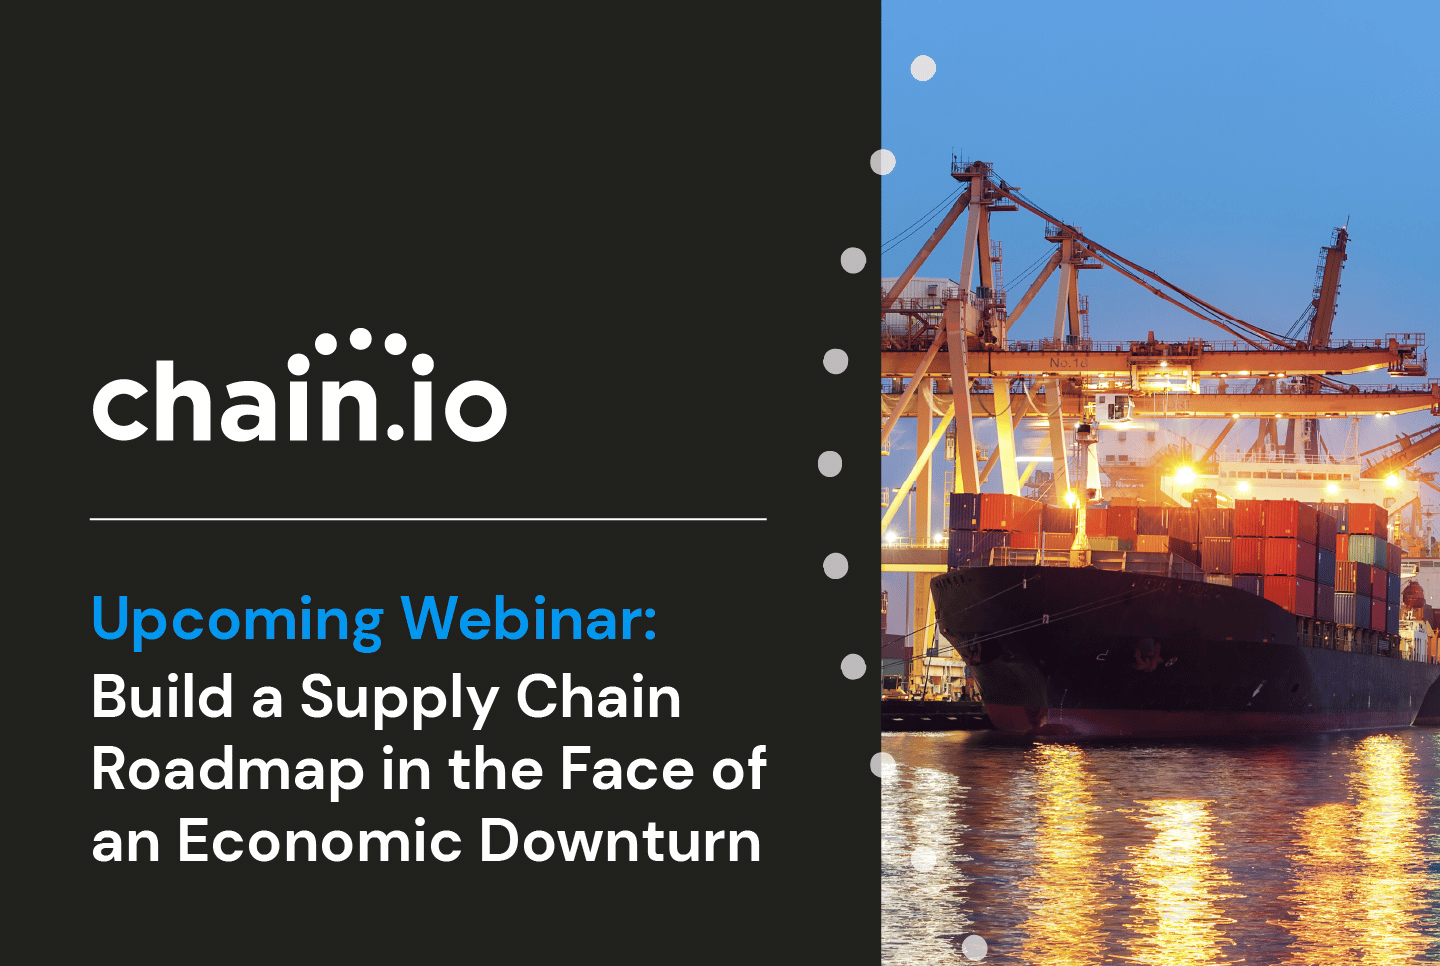 Upcoming Webinar: Build a Supply Chain Roadmap in the Face of an Economic Downturn